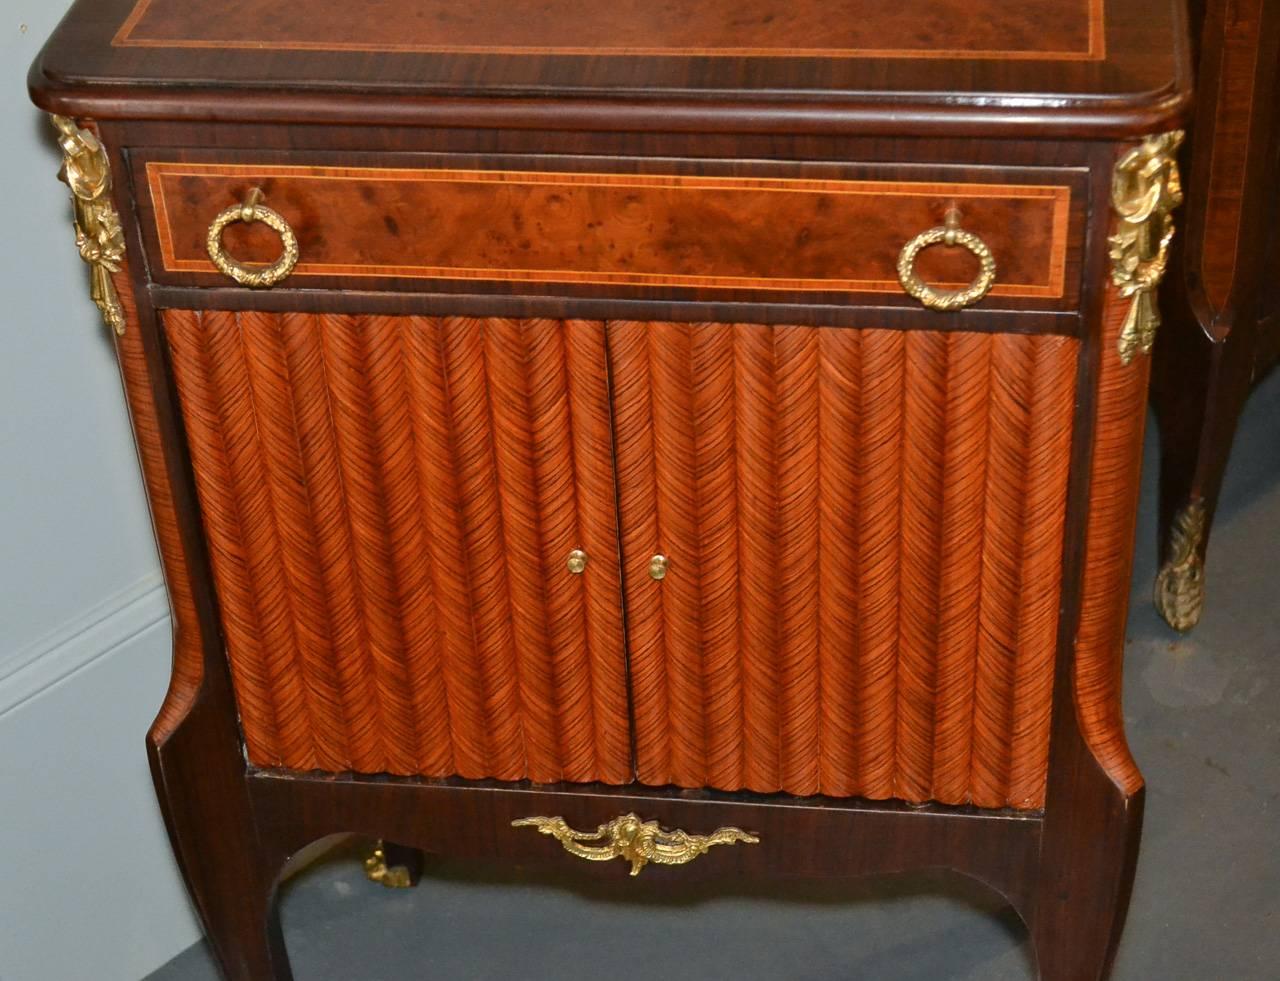 Excellent pair of French Transitional 1-drawer over 2-door mahogany side tables.  Having lovely classical gilt bronze mounts, stylish inlays, and resting on elegant tapered legs.  Wonderful for numerous designs!